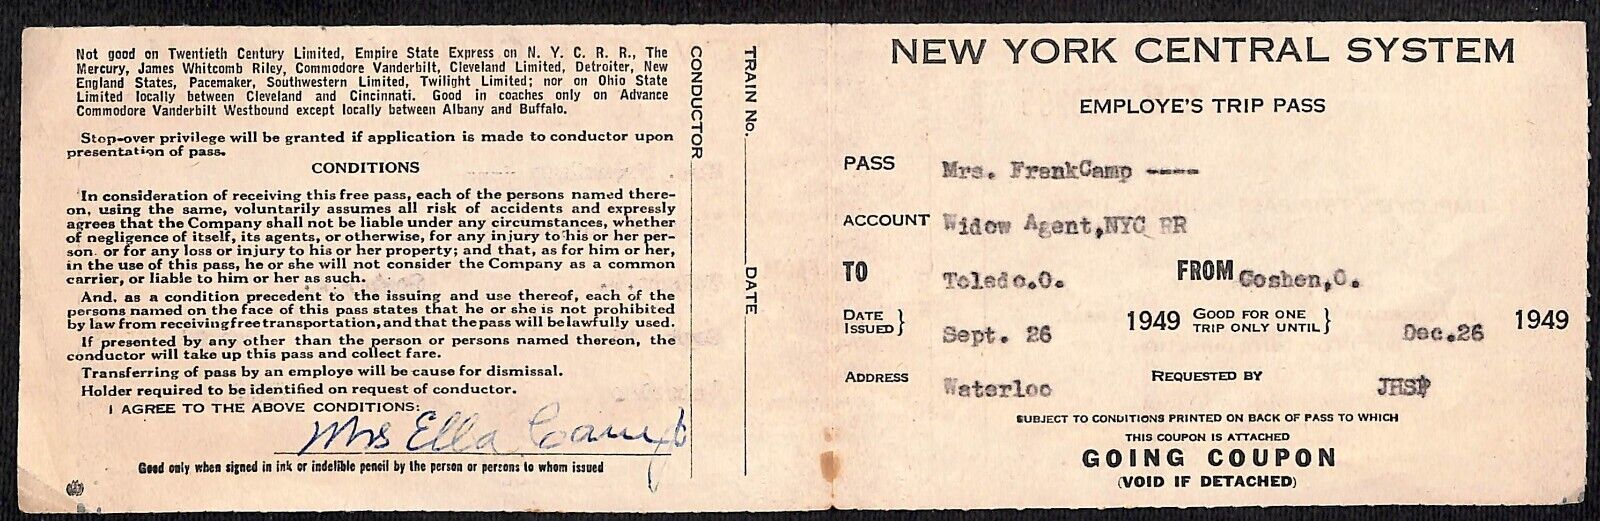 New York Central System Railroad 1949 Employe\'s Trip Pass #53295